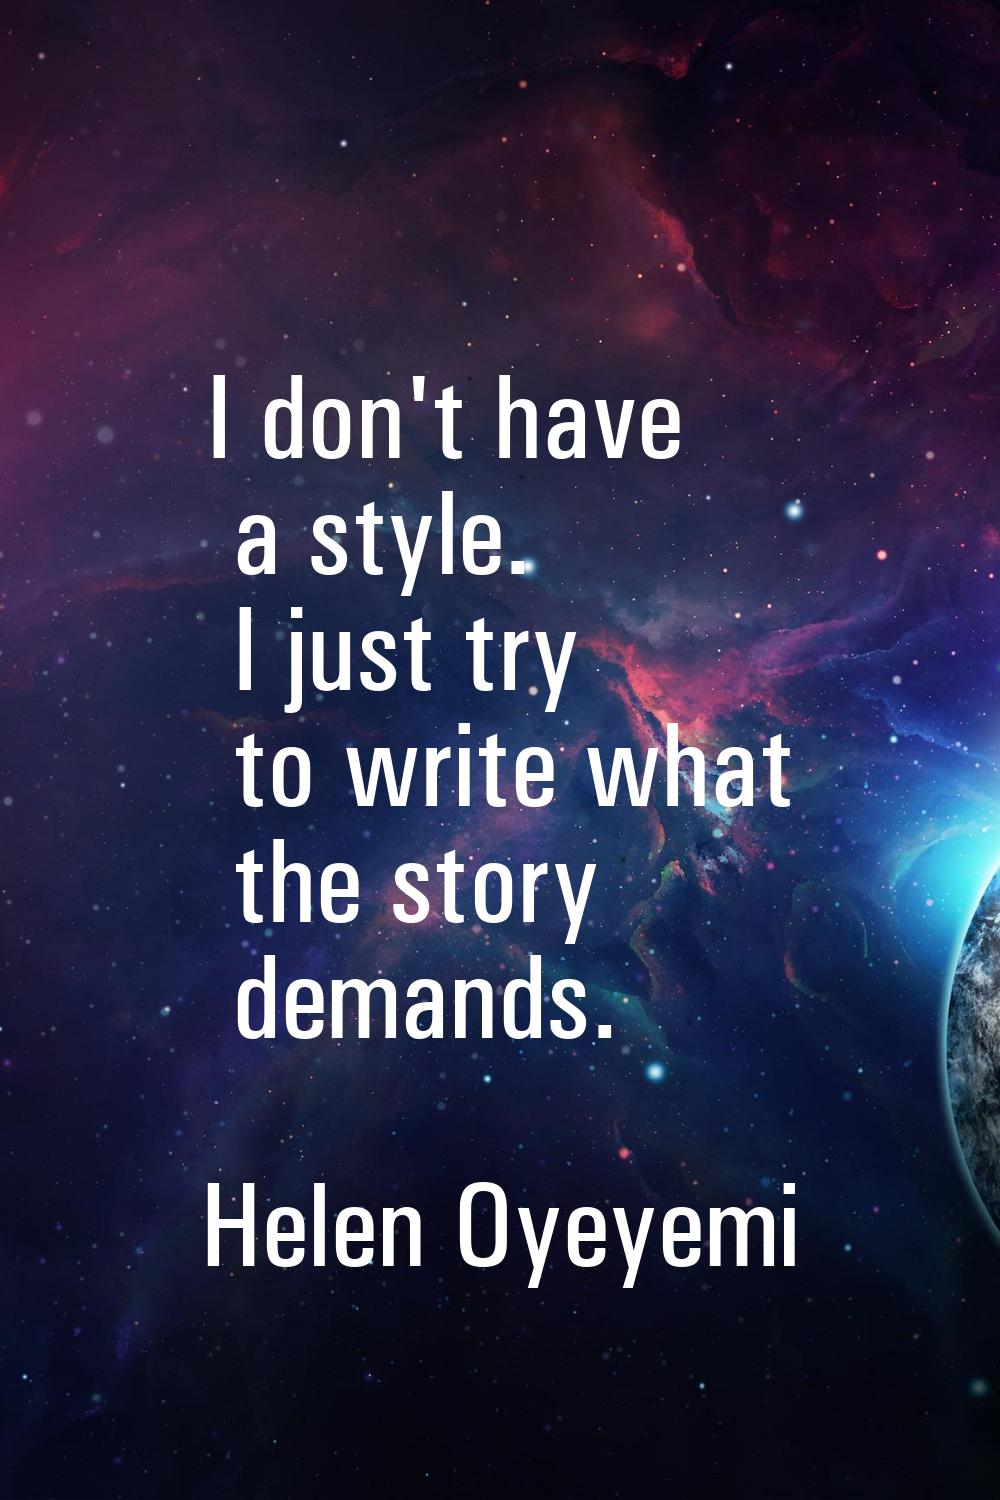 I don't have a style. I just try to write what the story demands.